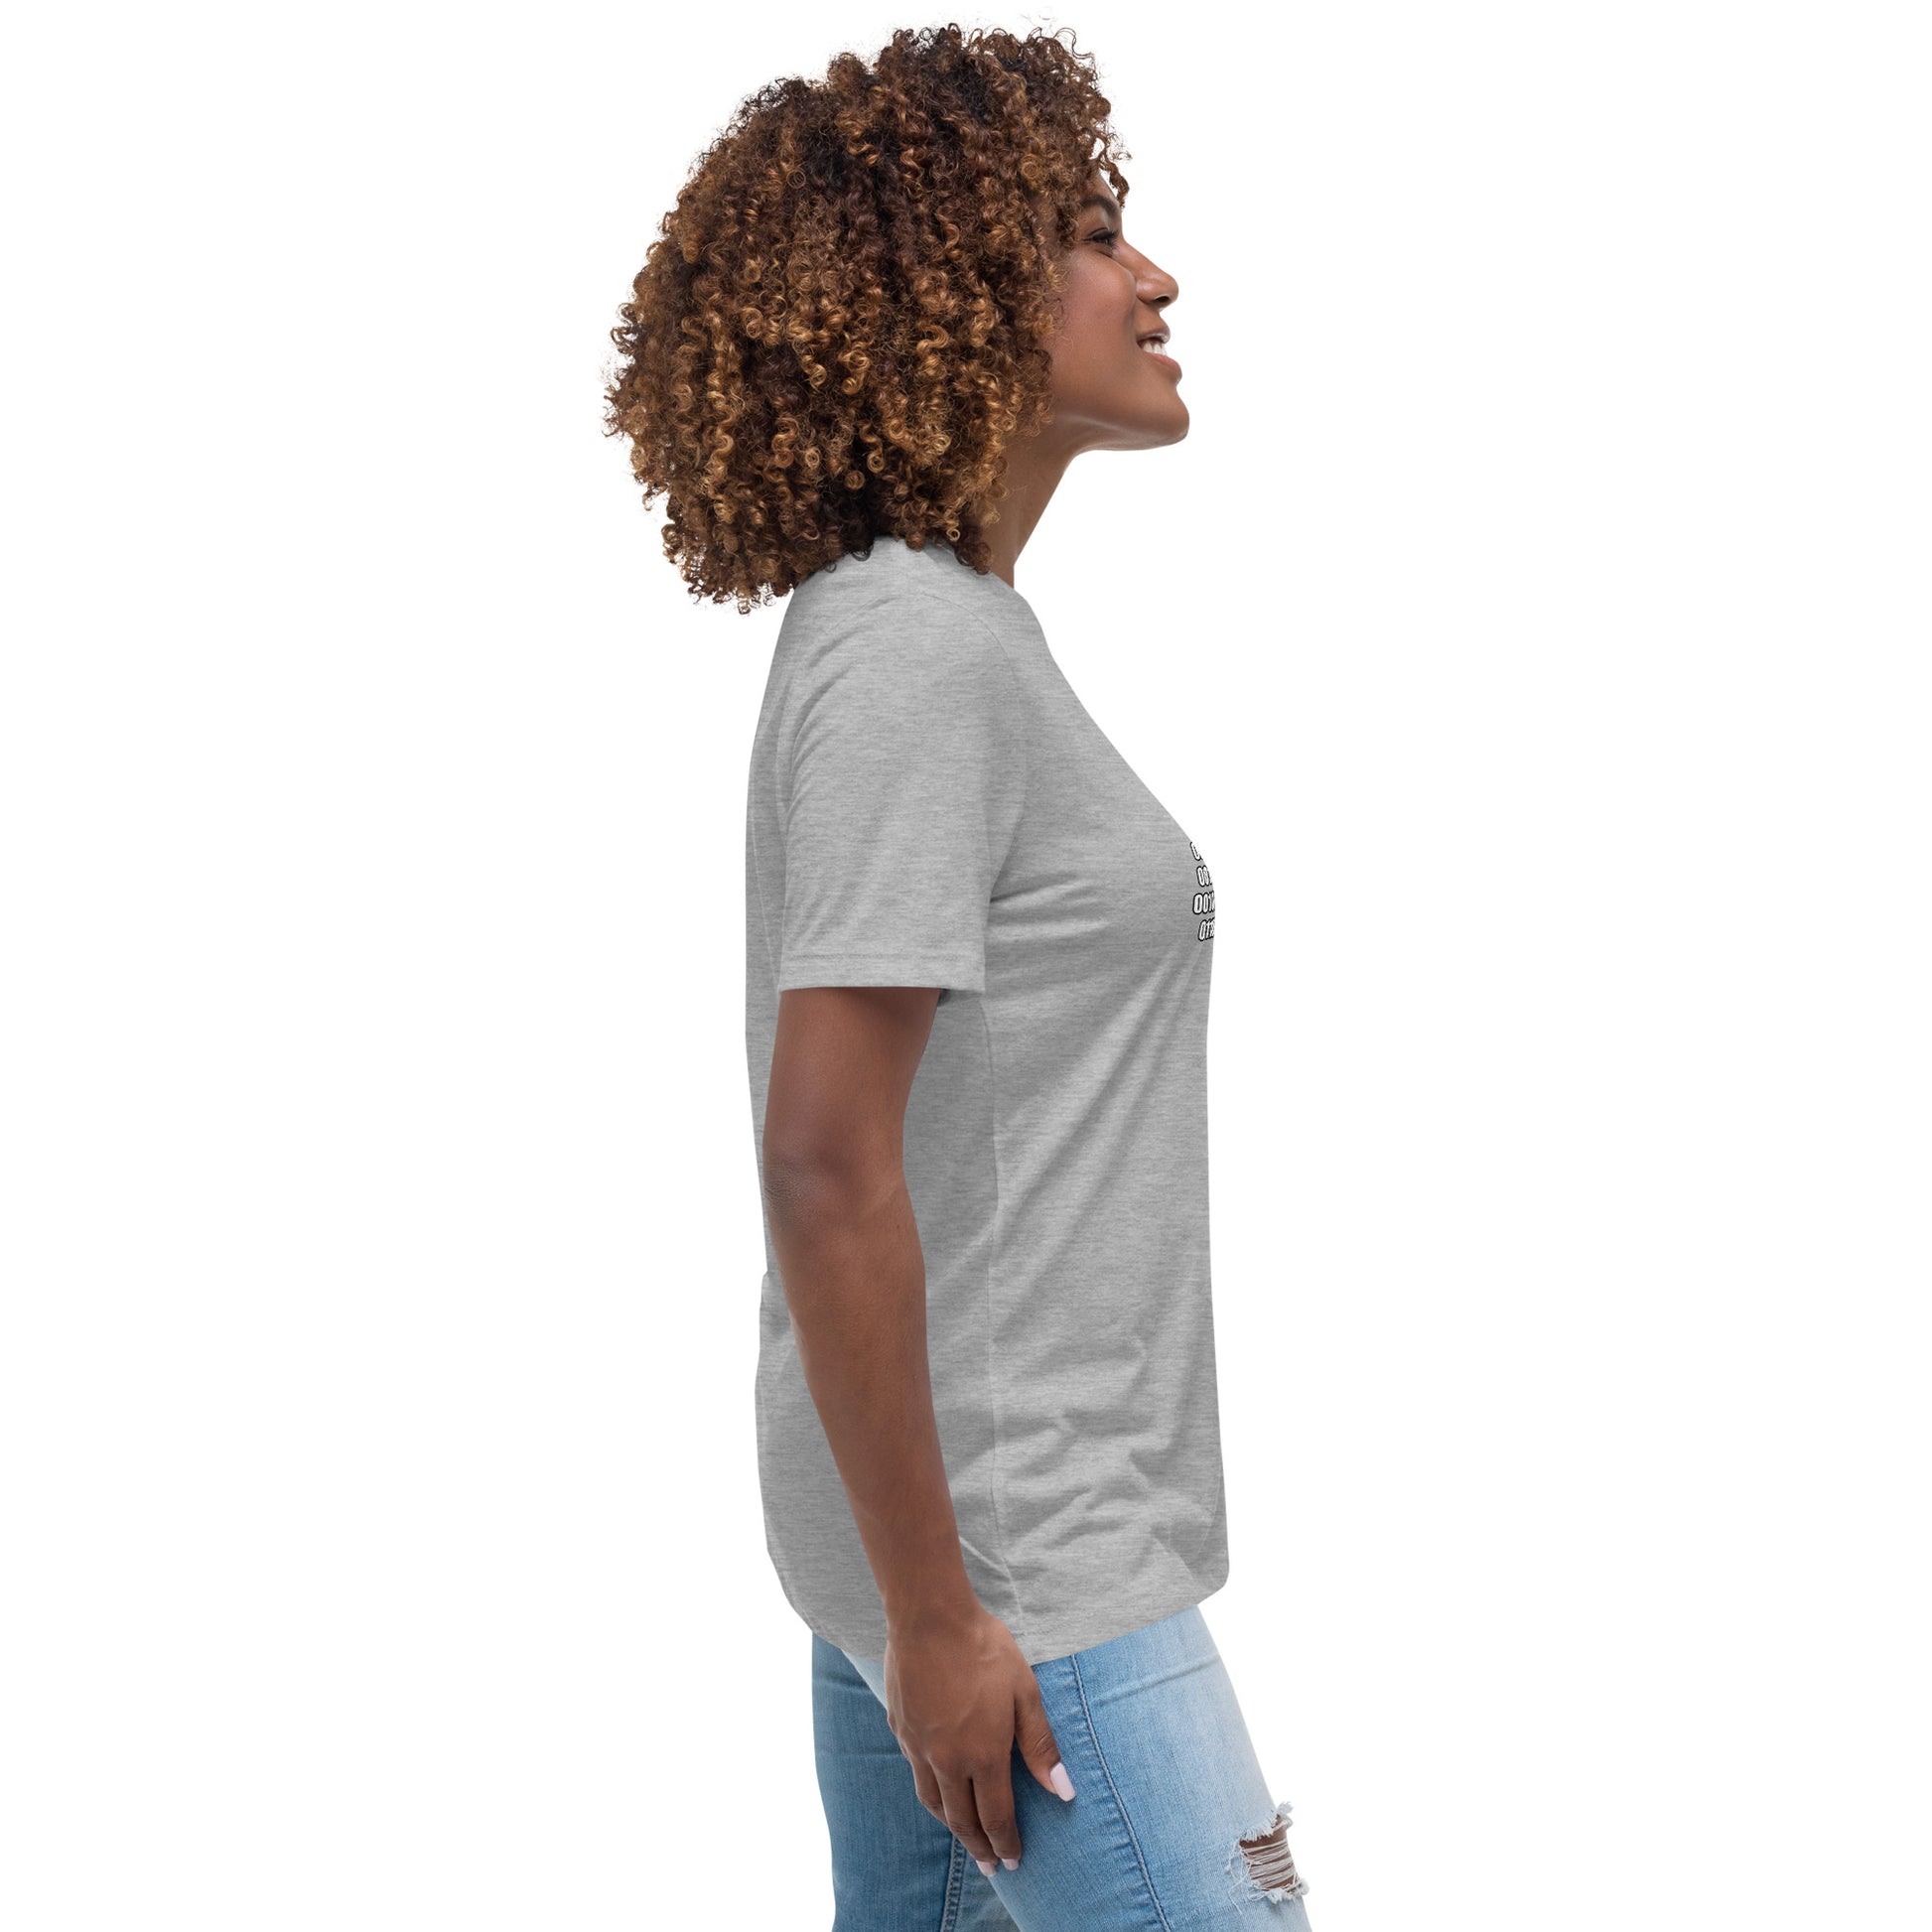 Woman with grey t-shirt with binary code "If you can read this"